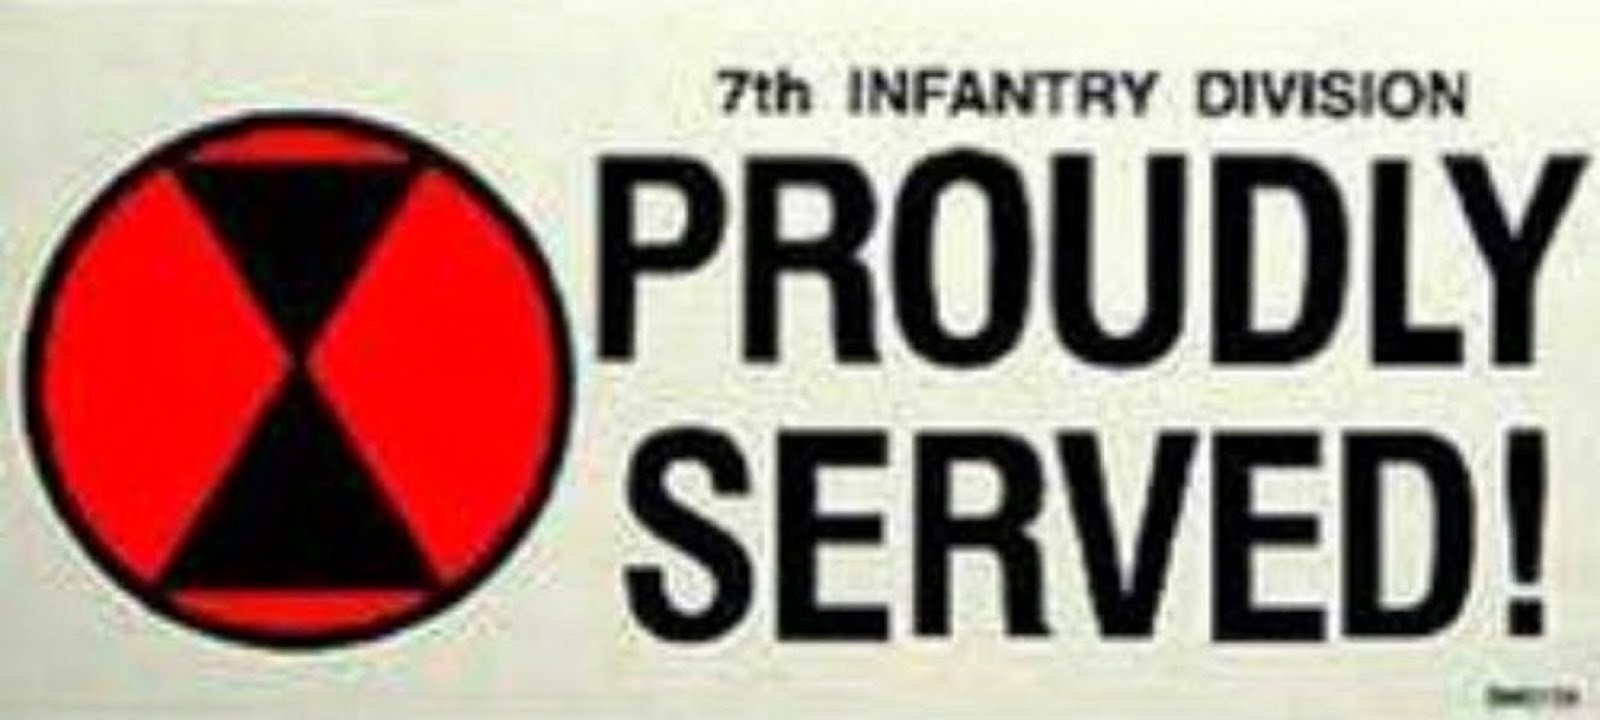 7th INFANTRY DIVISION - PROUDLY SERVED